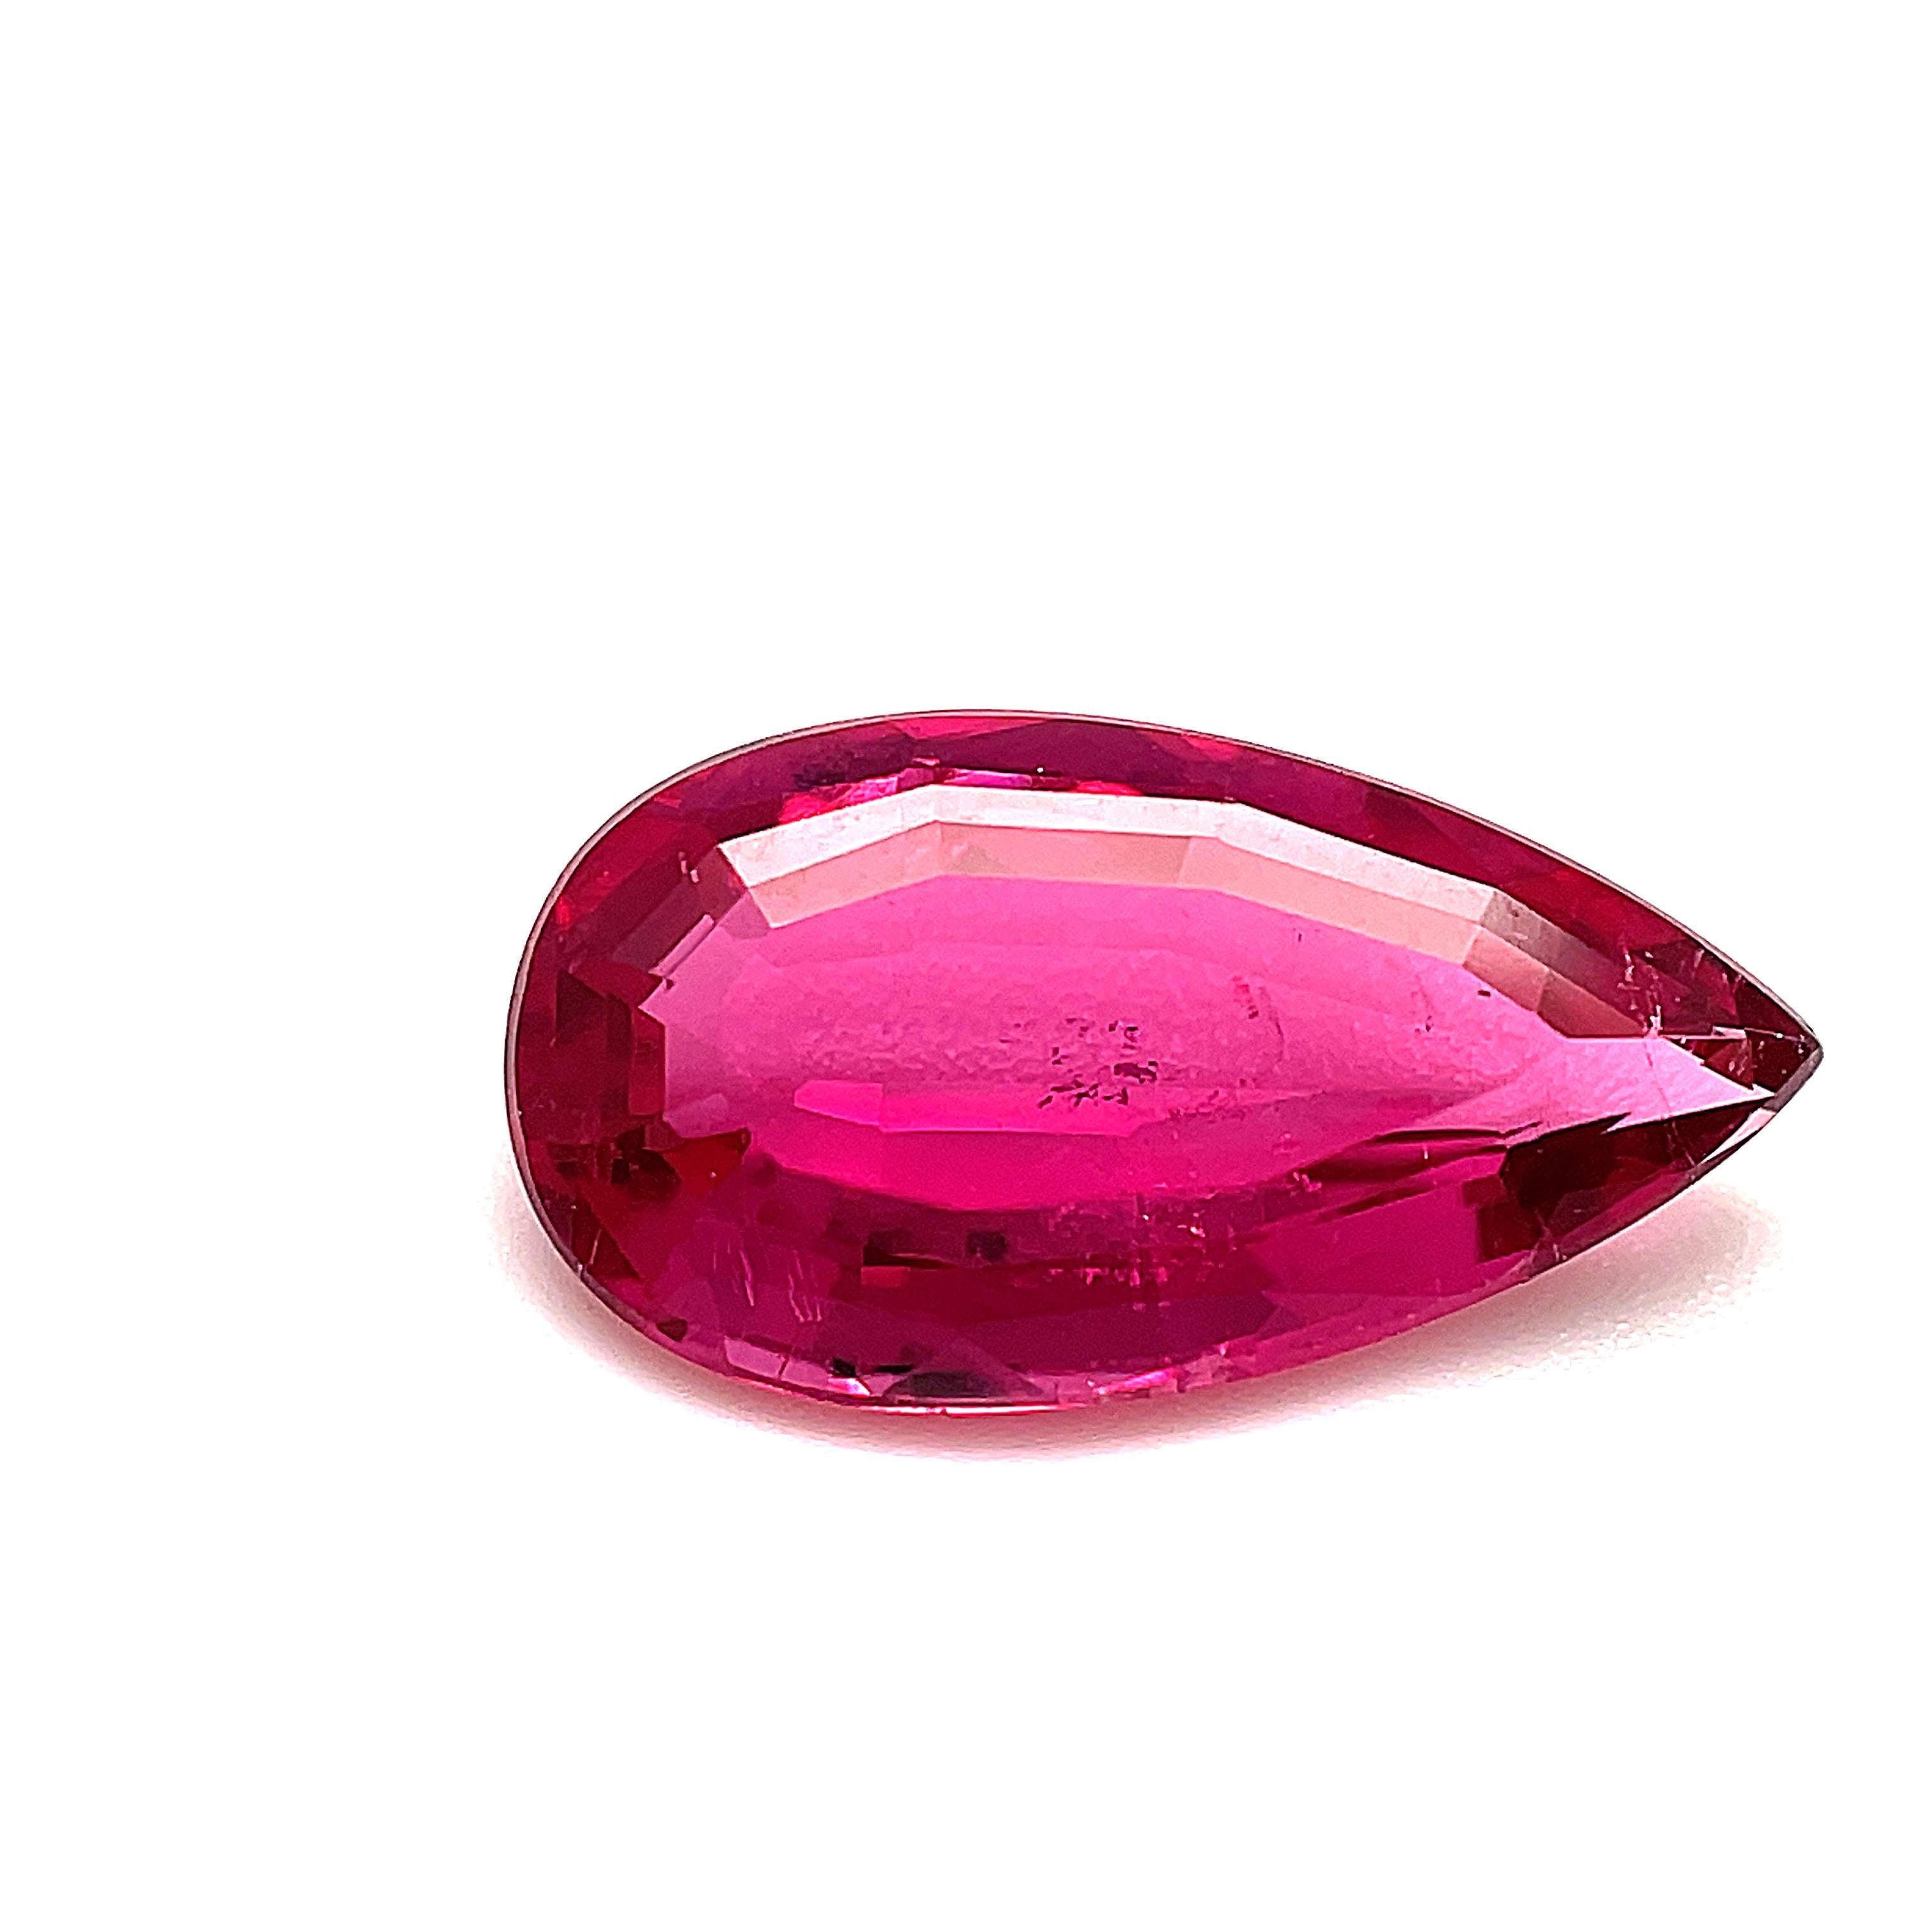 This vibrant pink rubellite tourmaline pear would be beautiful set as a sleek, ultra-sophisticated pendant or modern ring! Weighing 2.70 carats, it has a gorgeous elongated shape and striking fuchsia color. We offer complimentary design